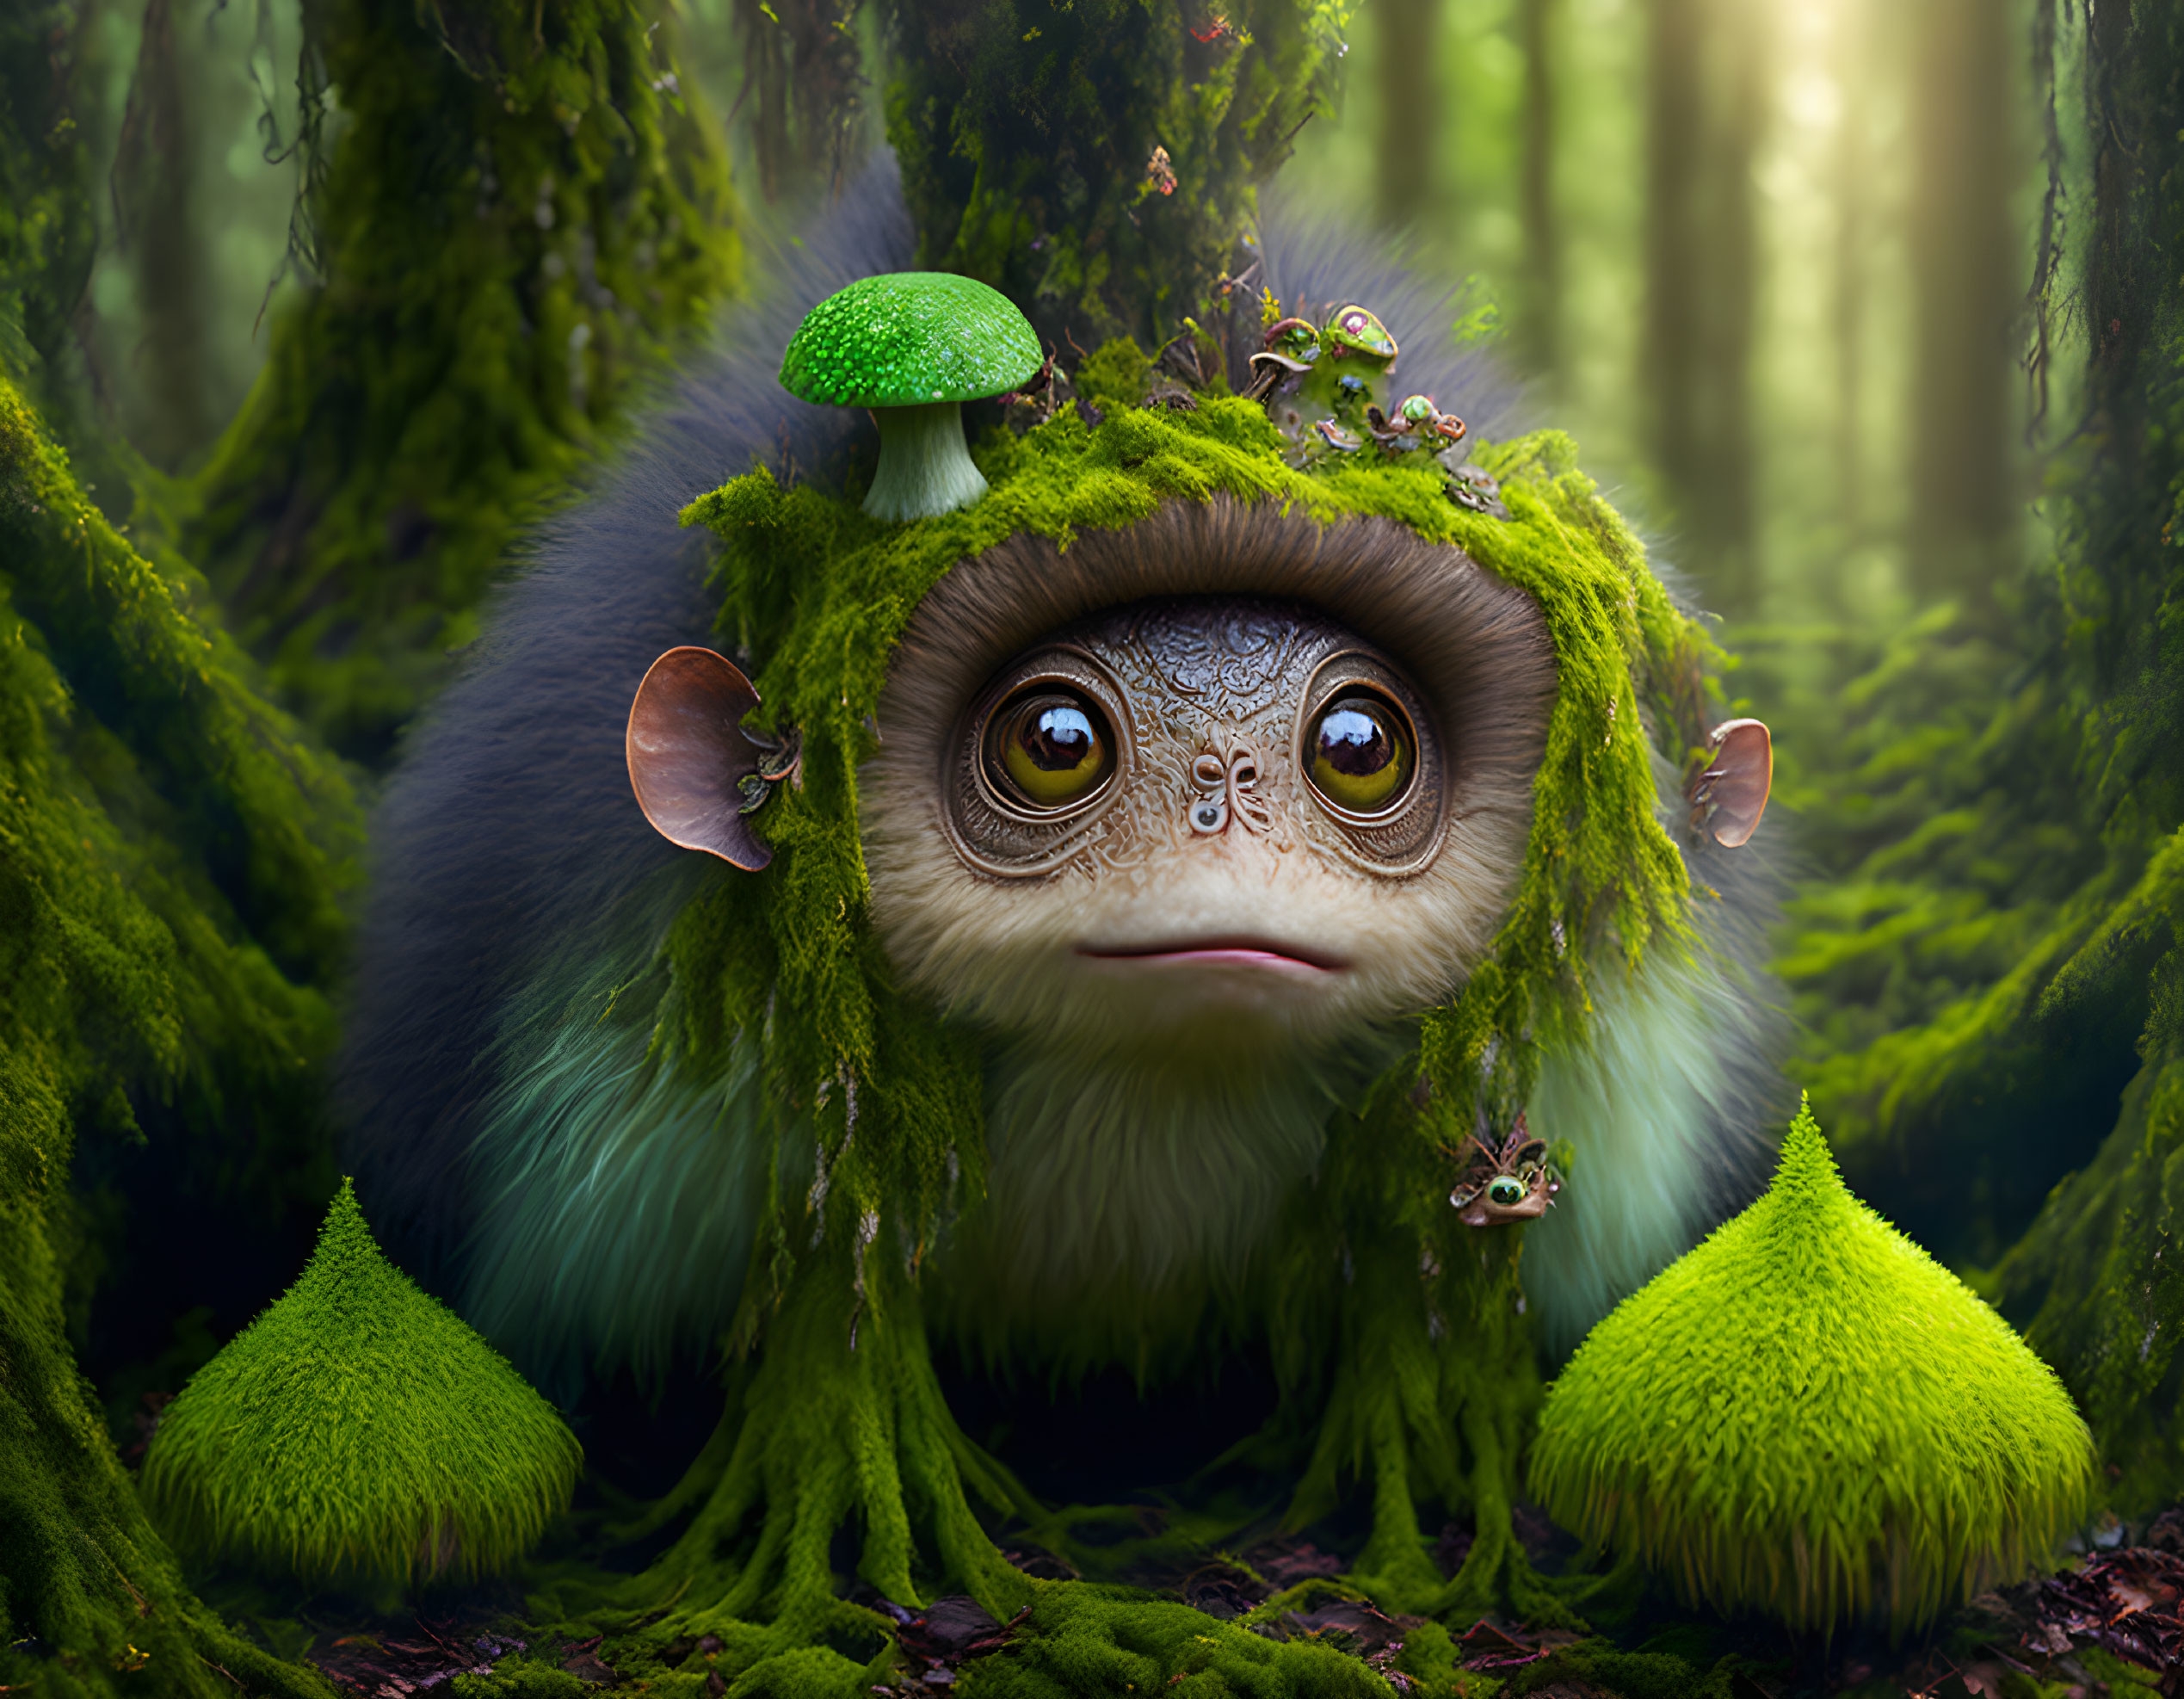 Moss-Covered Monkey Creature with Mushroom Cap and Forest Critters